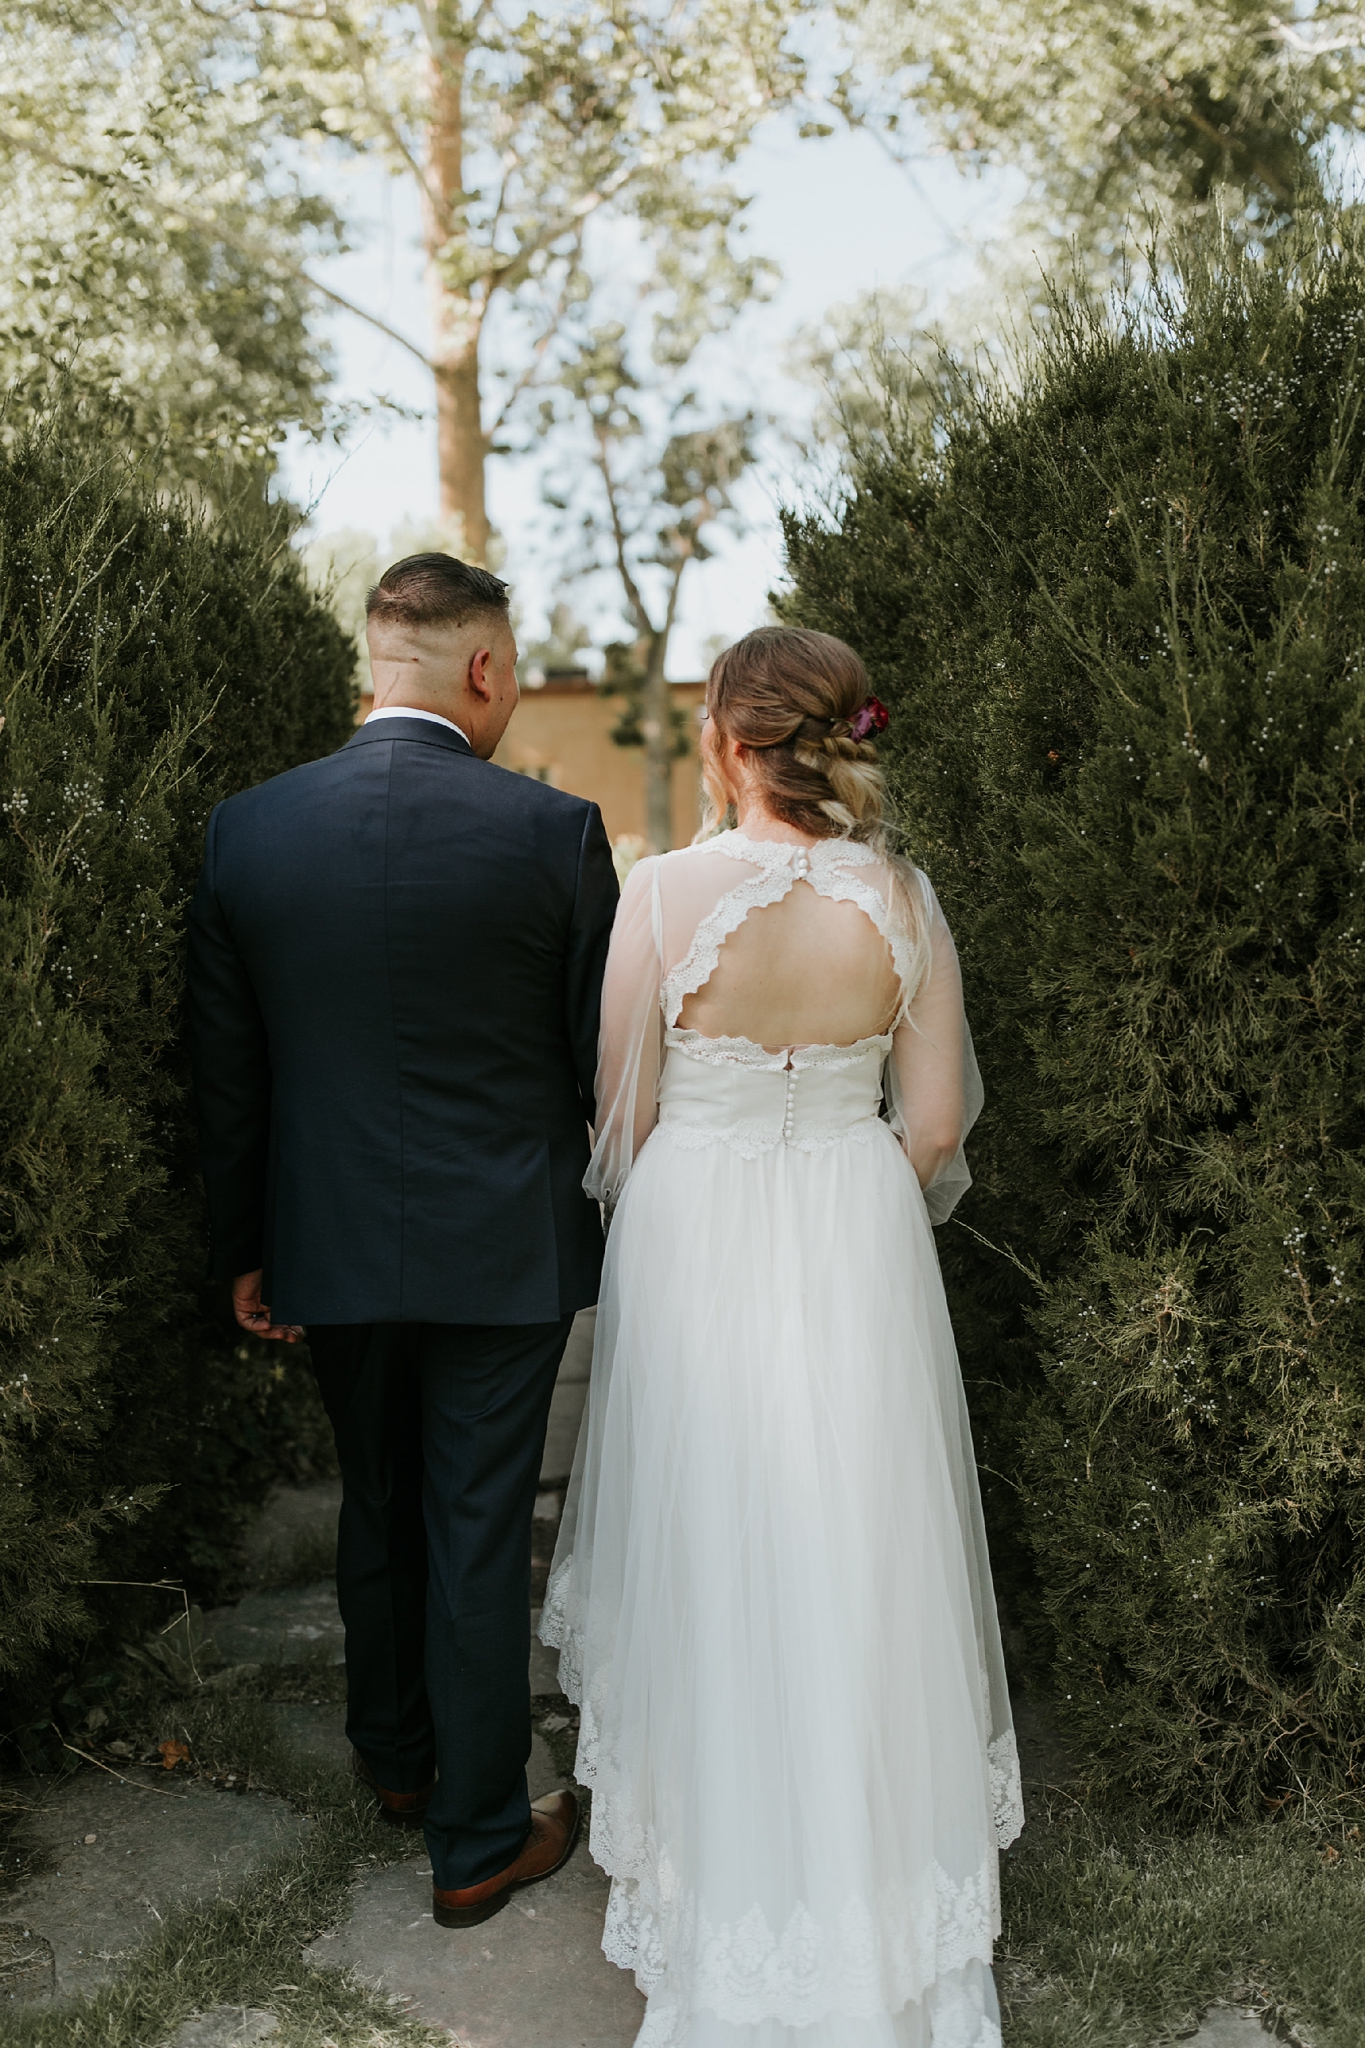 Alicia+lucia+photography+-+albuquerque+wedding+photographer+-+santa+fe+wedding+photography+-+new+mexico+wedding+photographer+-+new+mexico+wedding+-+wedding+gowns+-+bridal+gowns+-+a+line+wedding+gown_0031.jpg